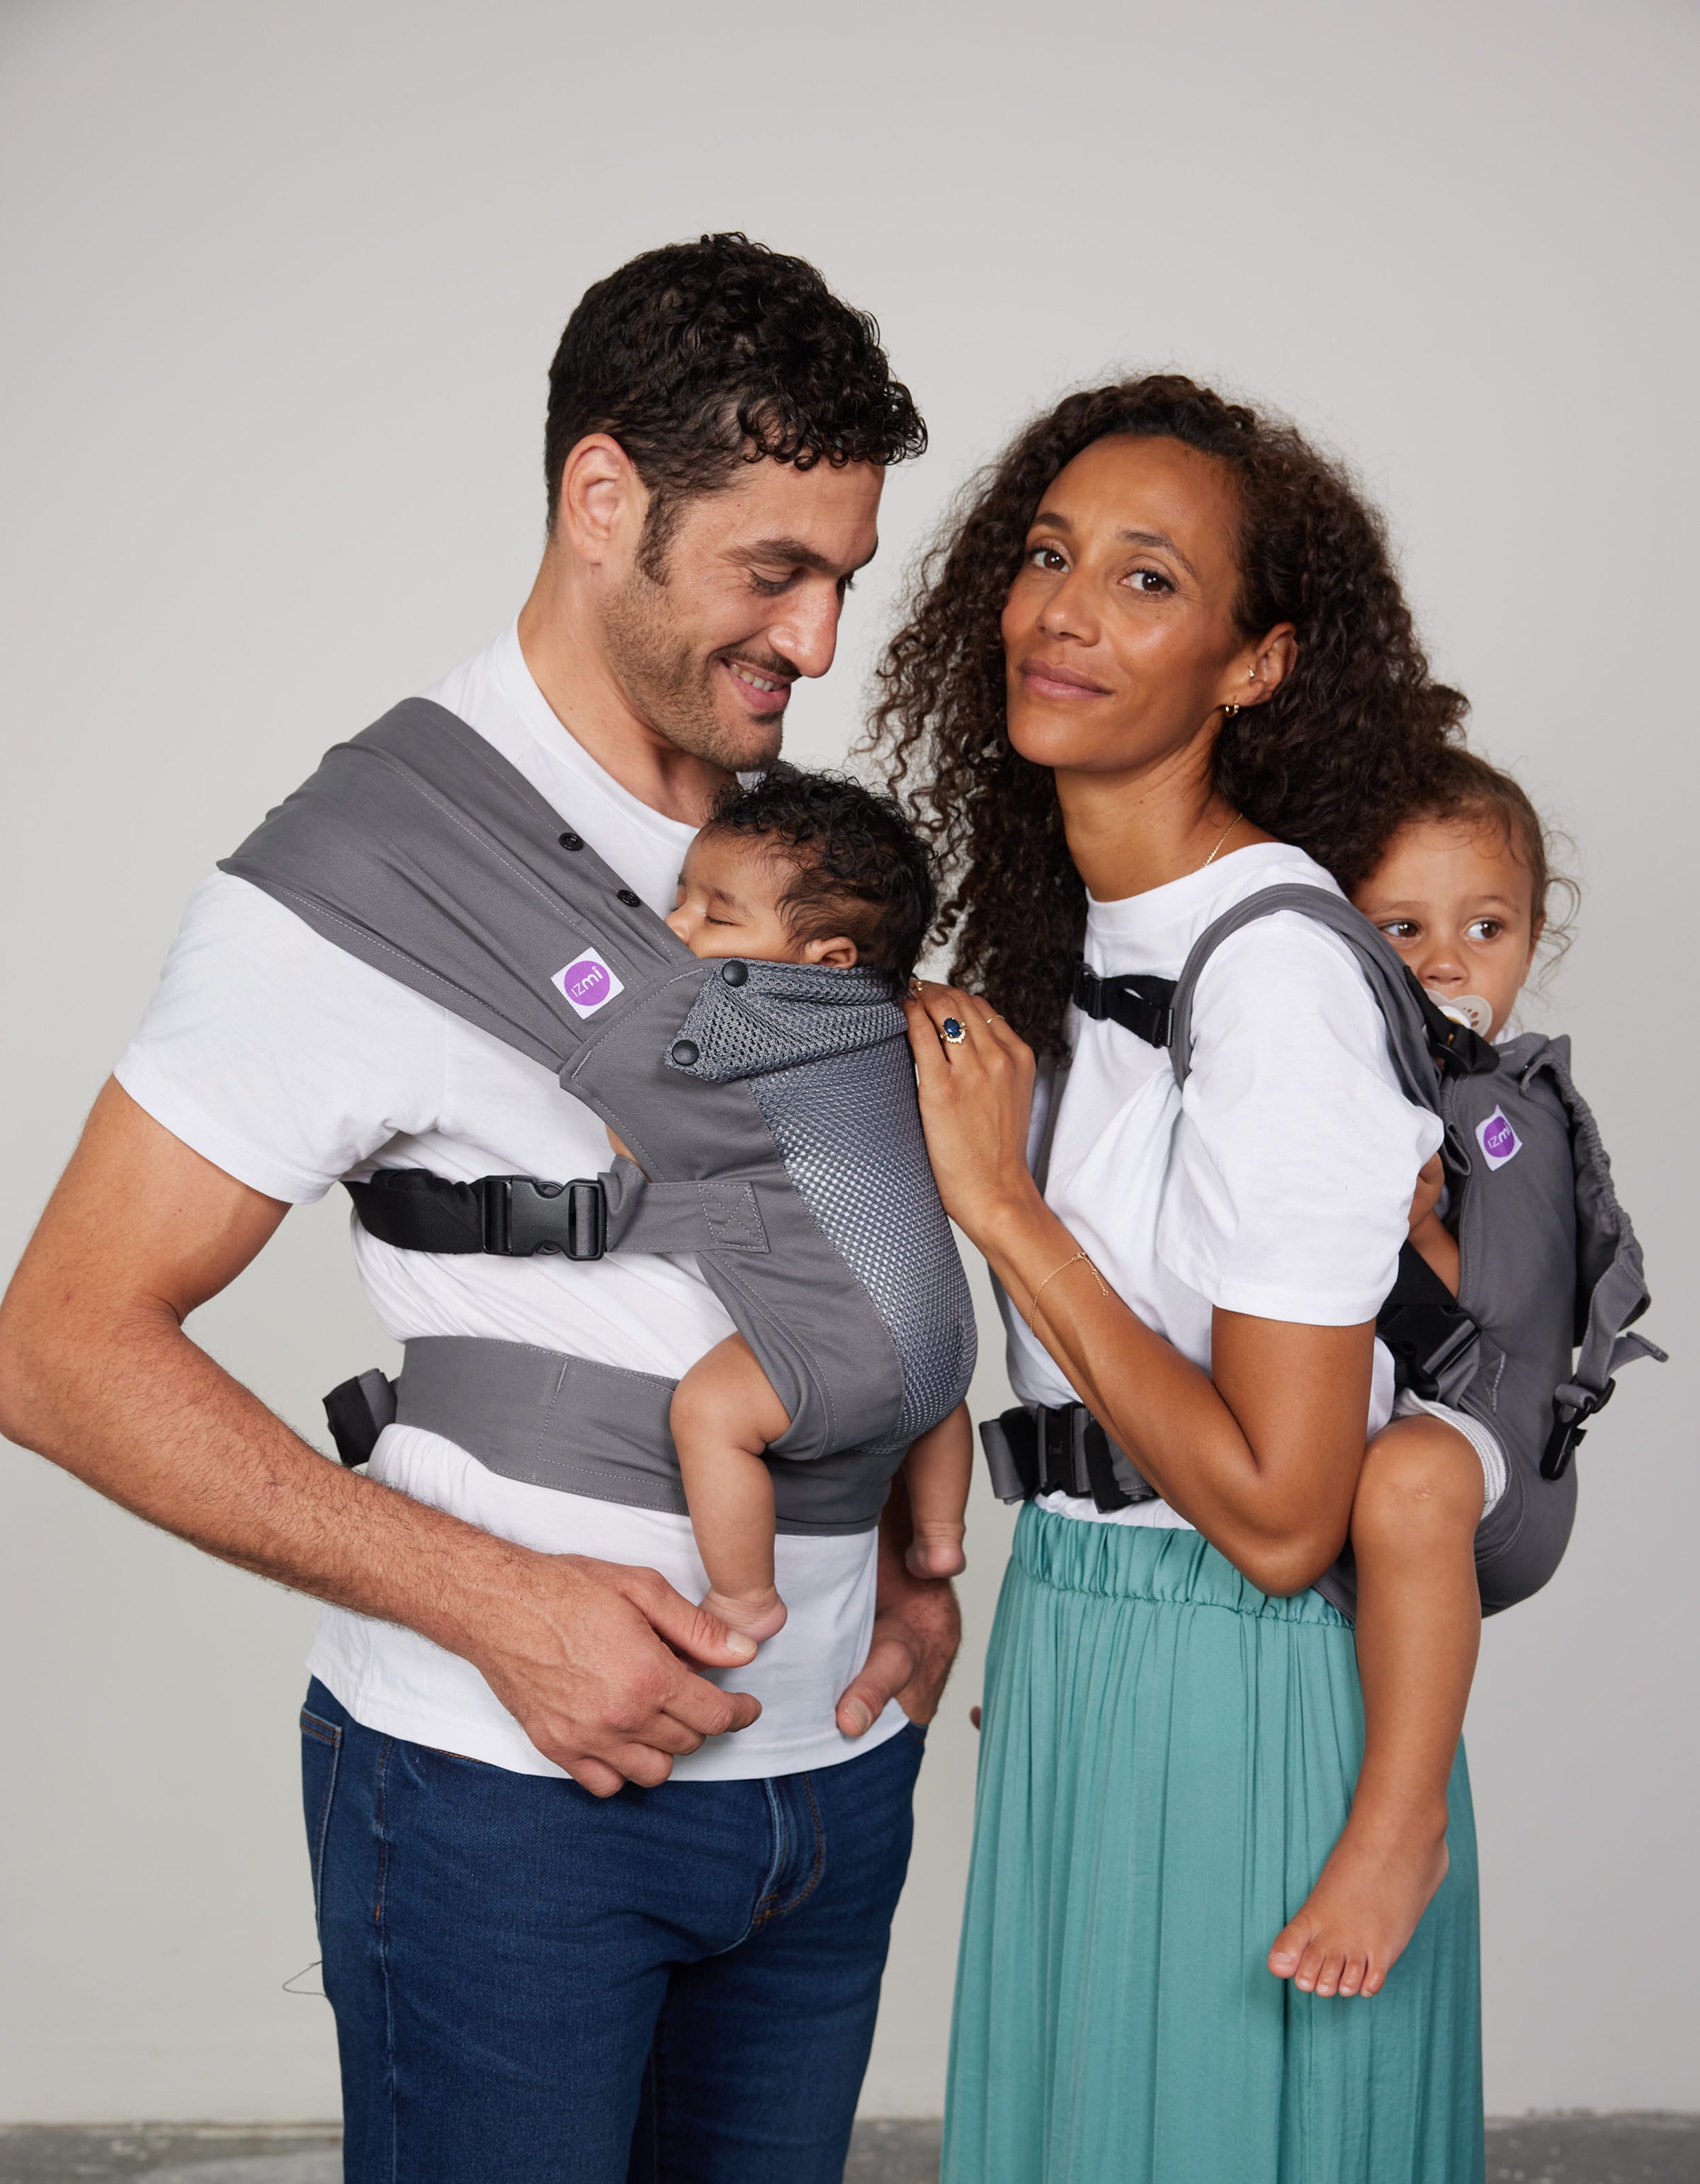 Man carries baby on his front in Izmi Breeze Baby Carrier while woman carries toddler on her back in Izmi Toddler Carrier